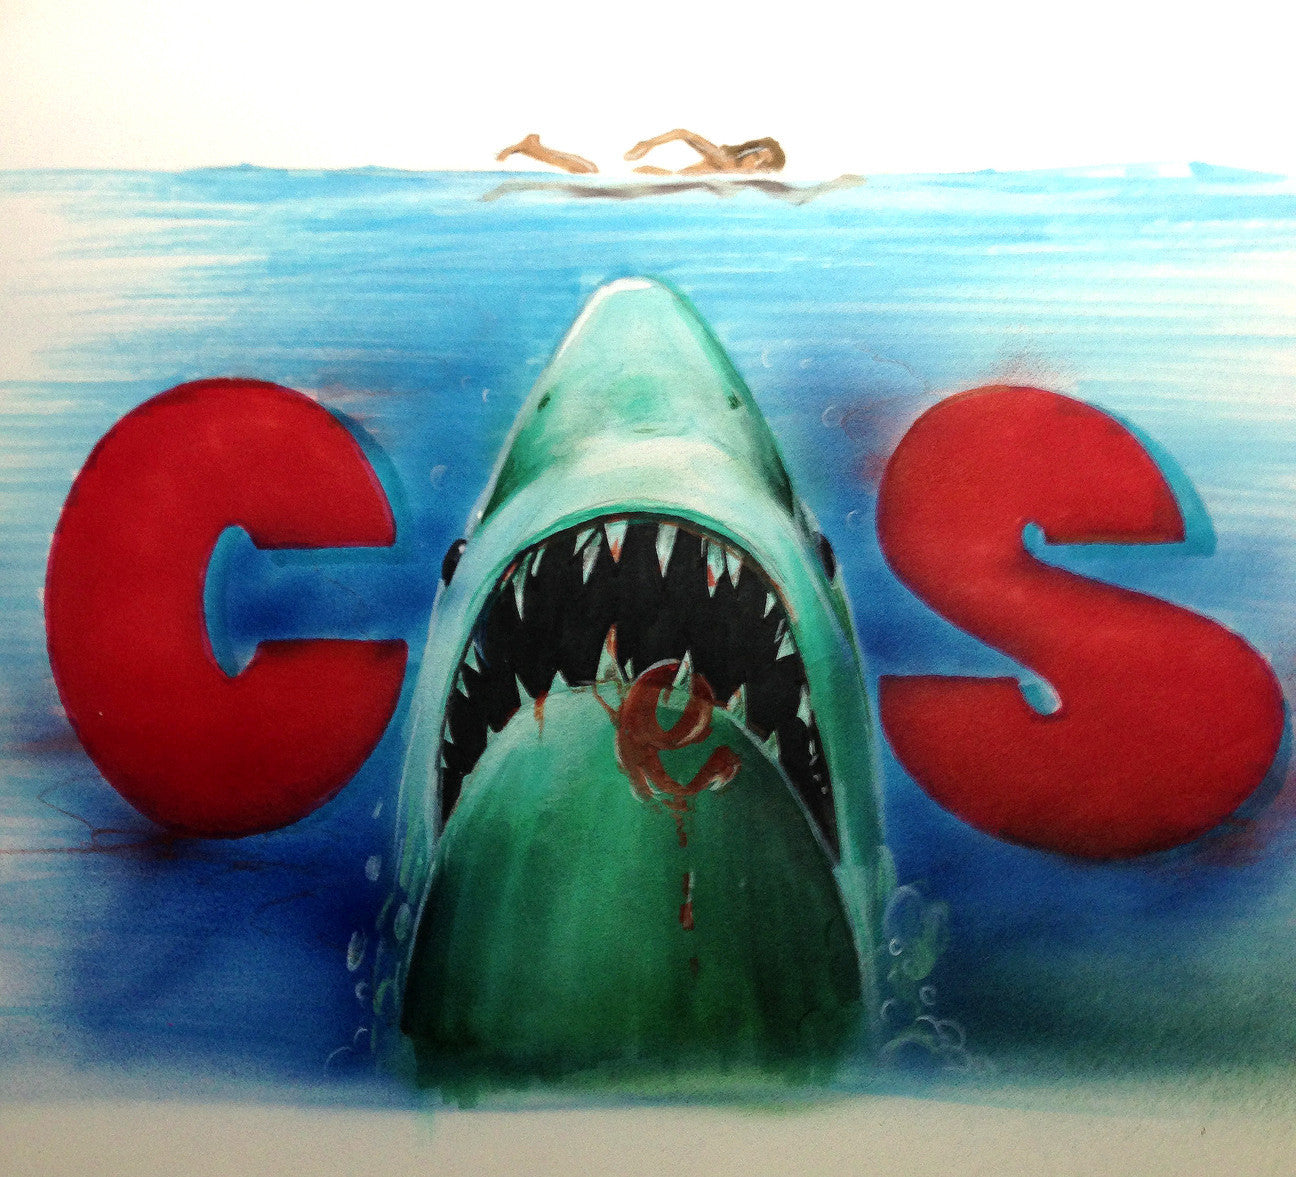 CES ONE- "Jaws" BlackBook Drawing